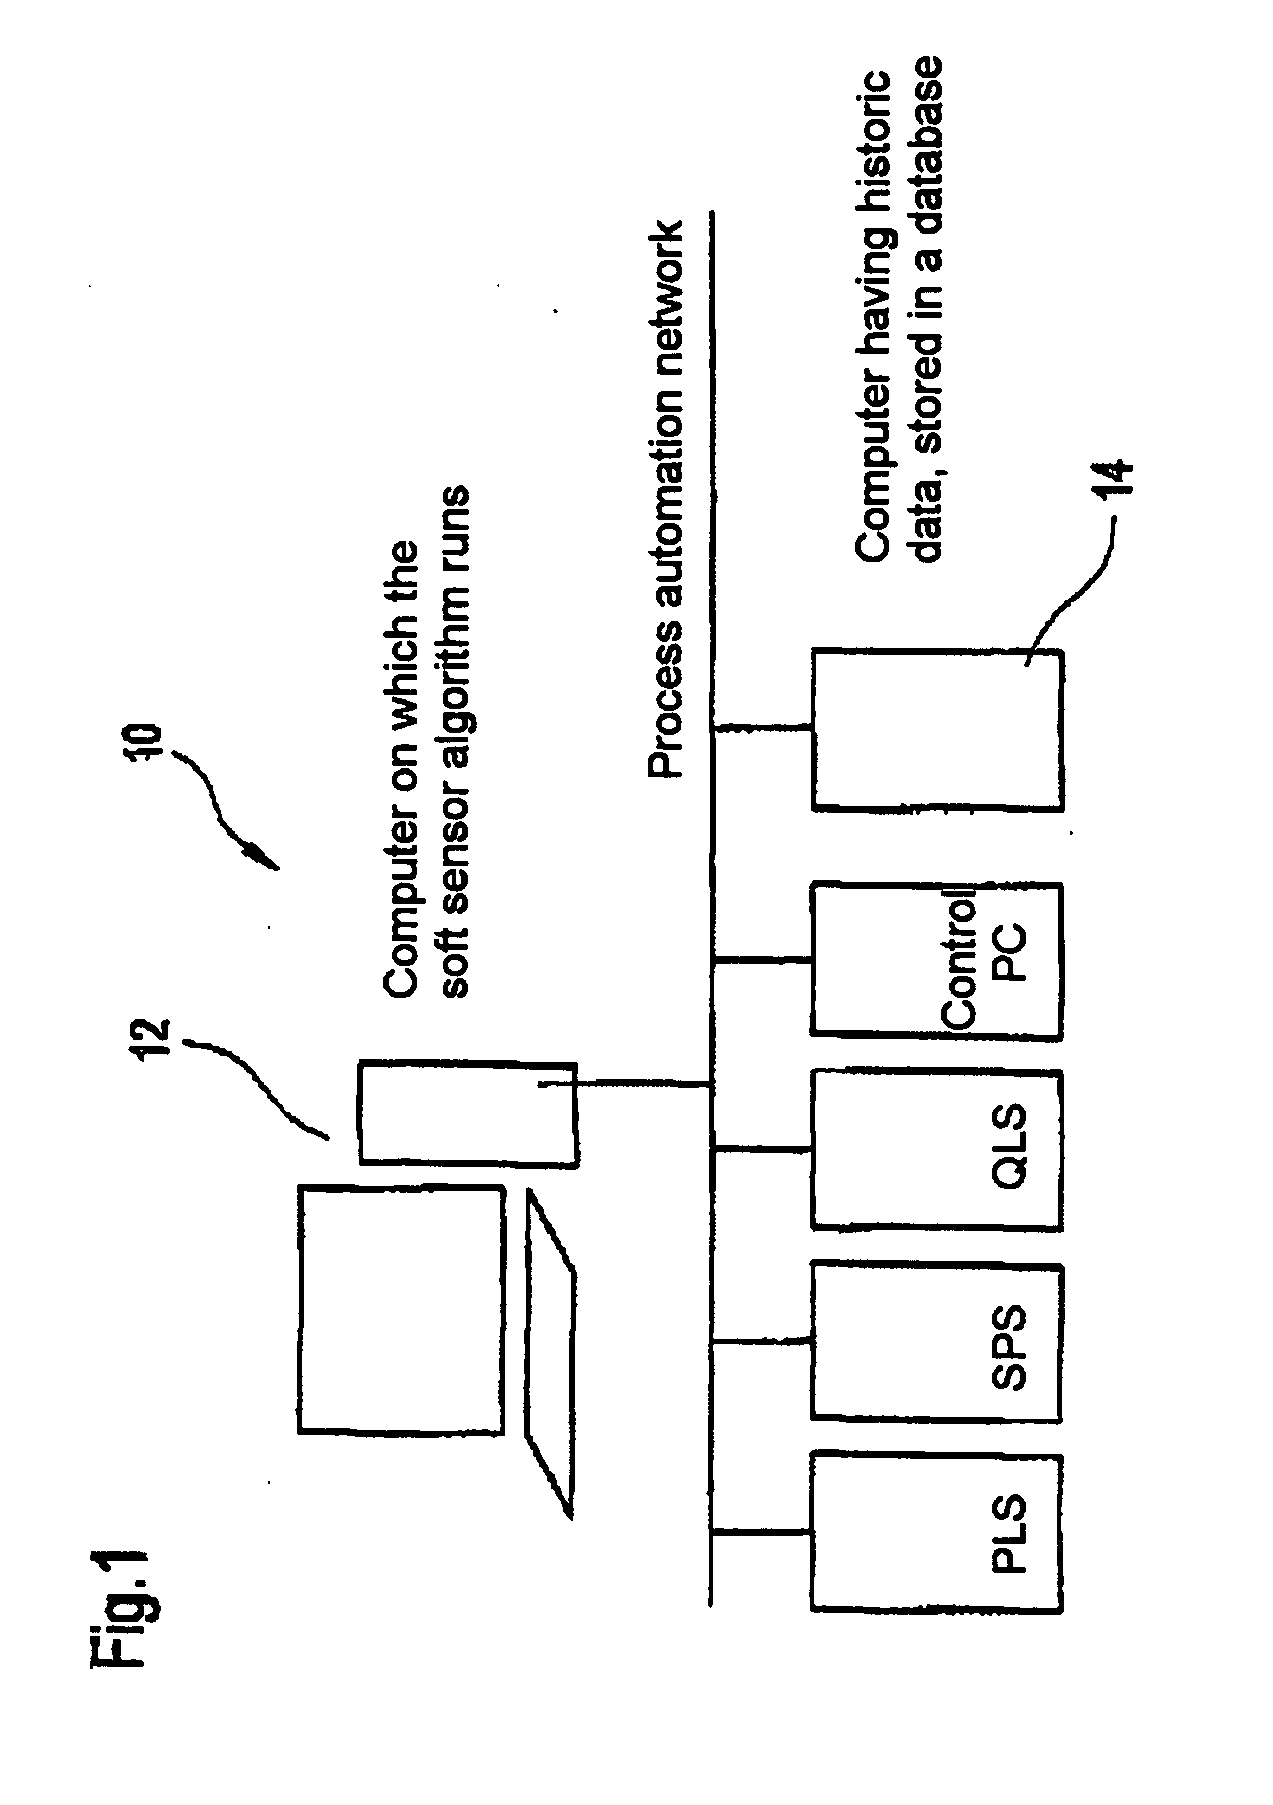 System for computer-aided measurement of quality and/or process data in a paper machine